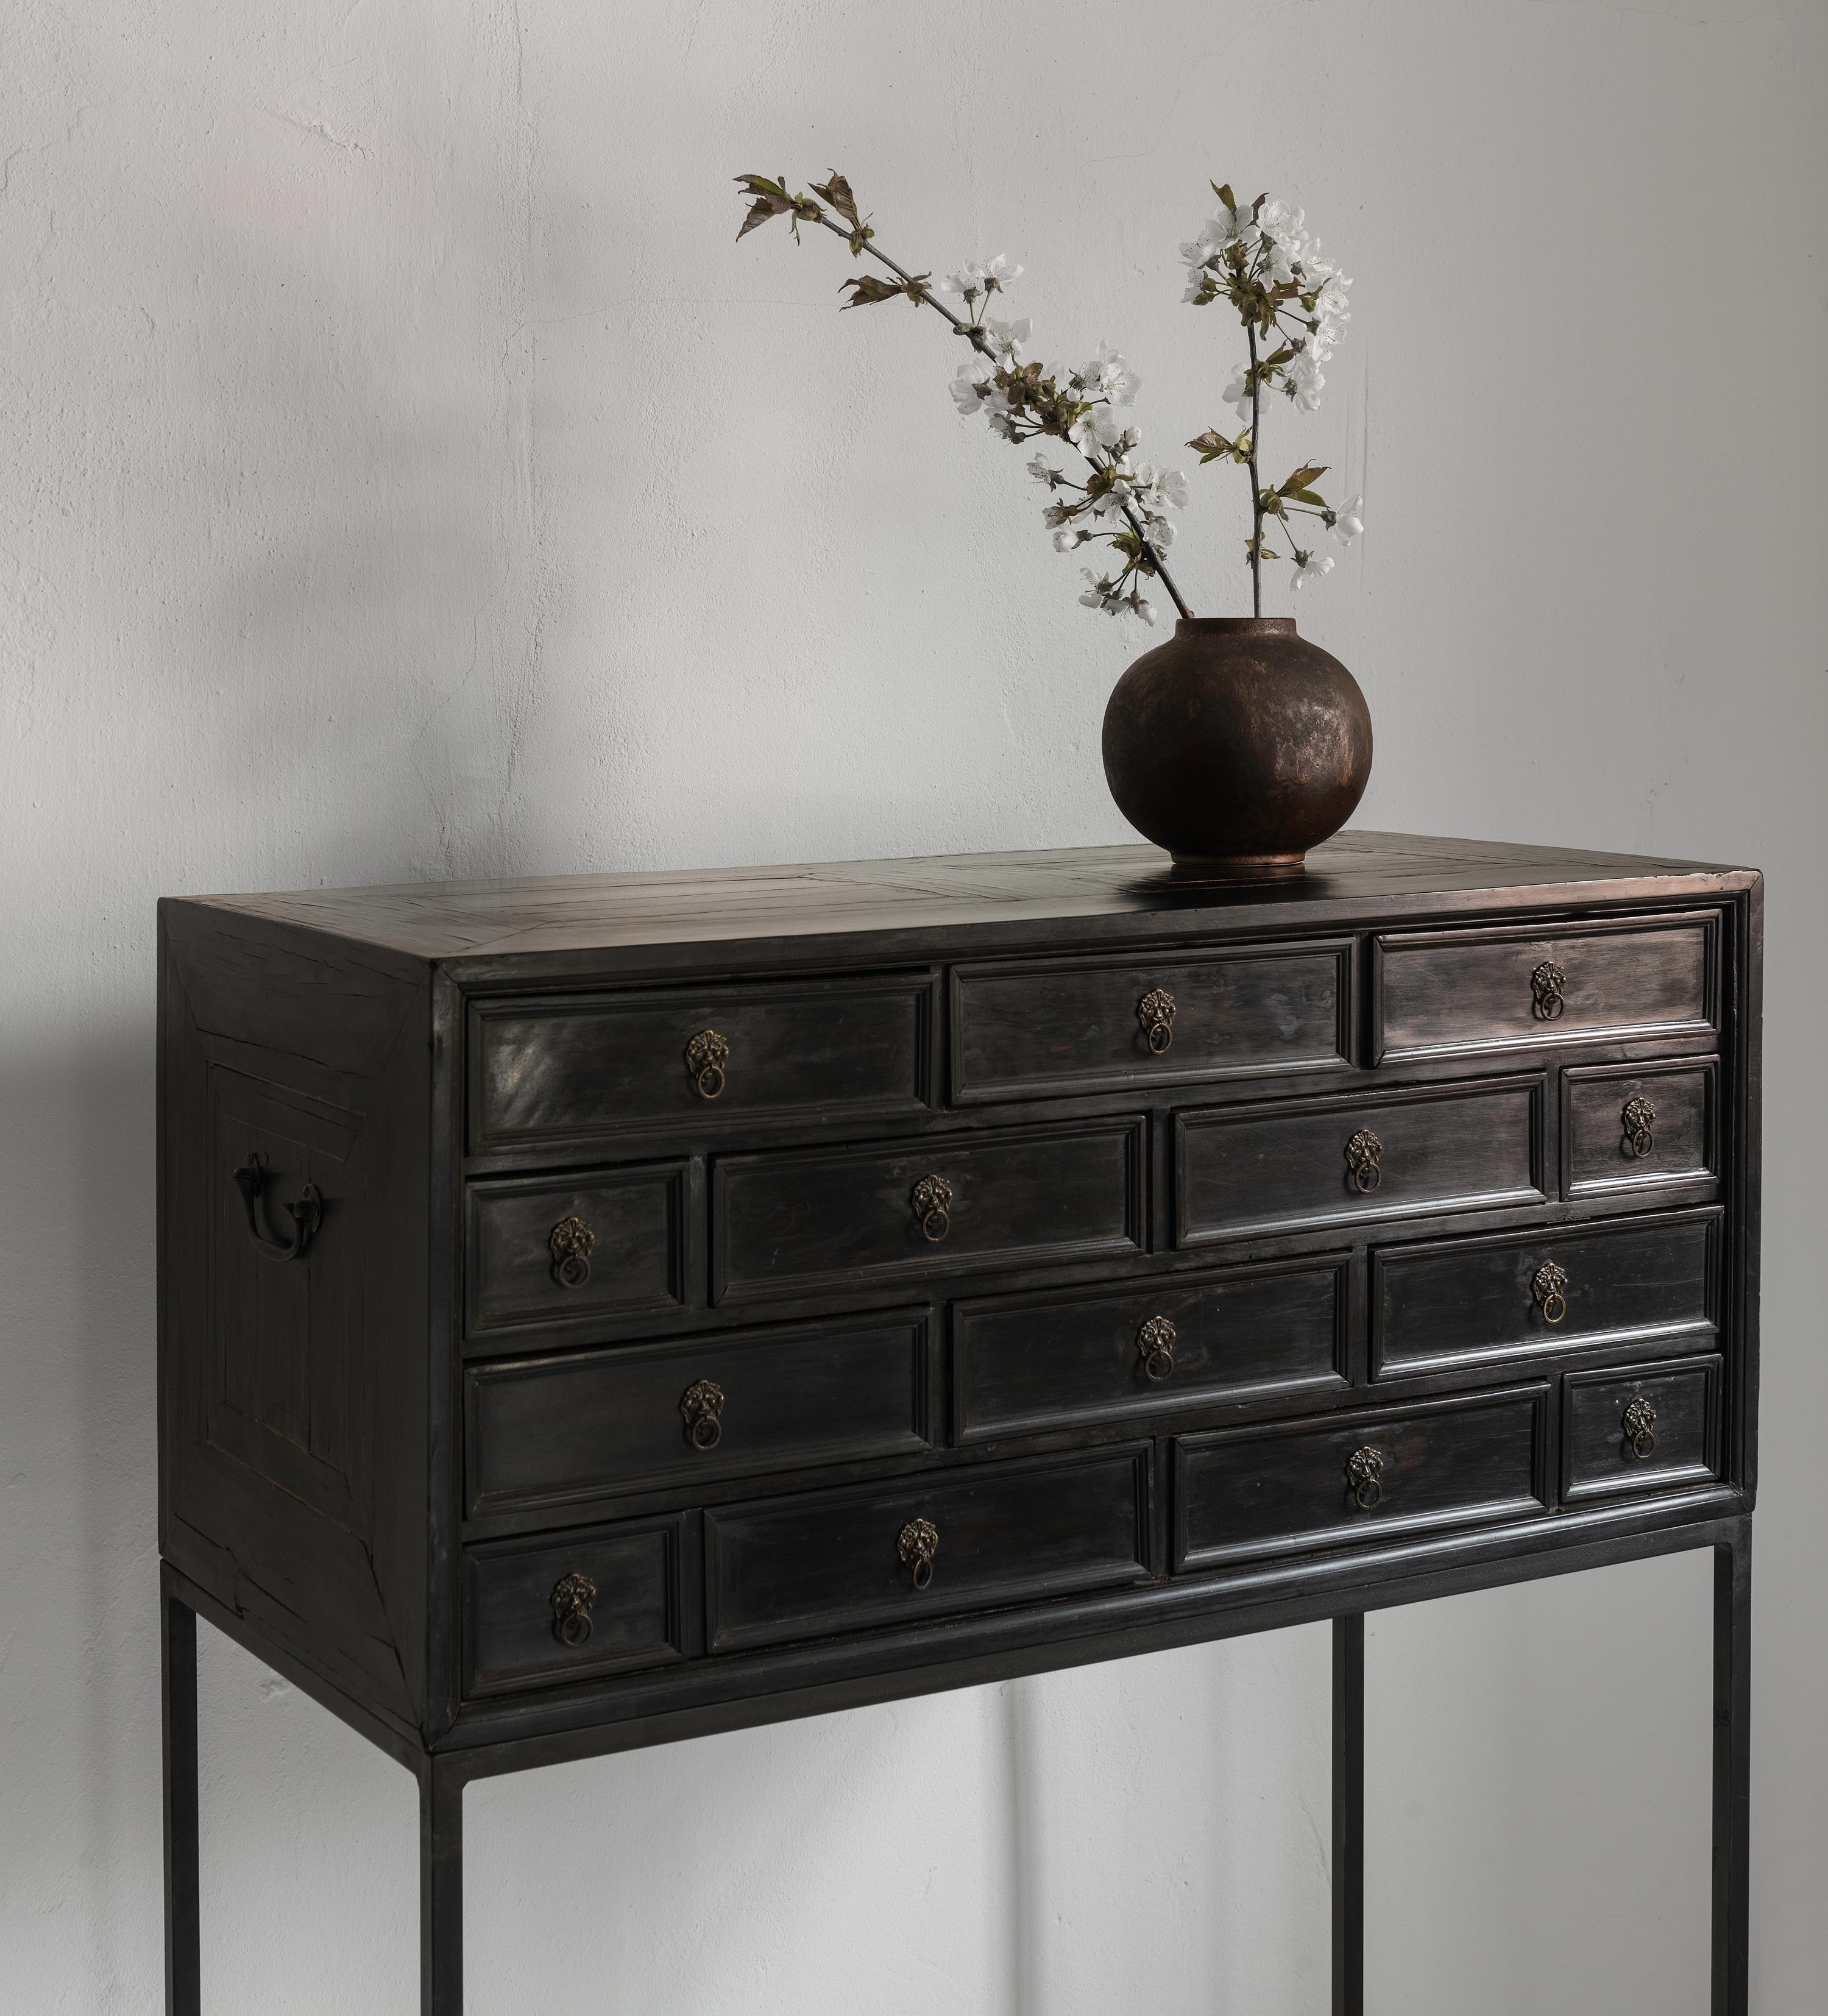 Baroque Elegant Minimalistic 17th Century Ebonized Cabinet on a Contemporary Steel Stand For Sale